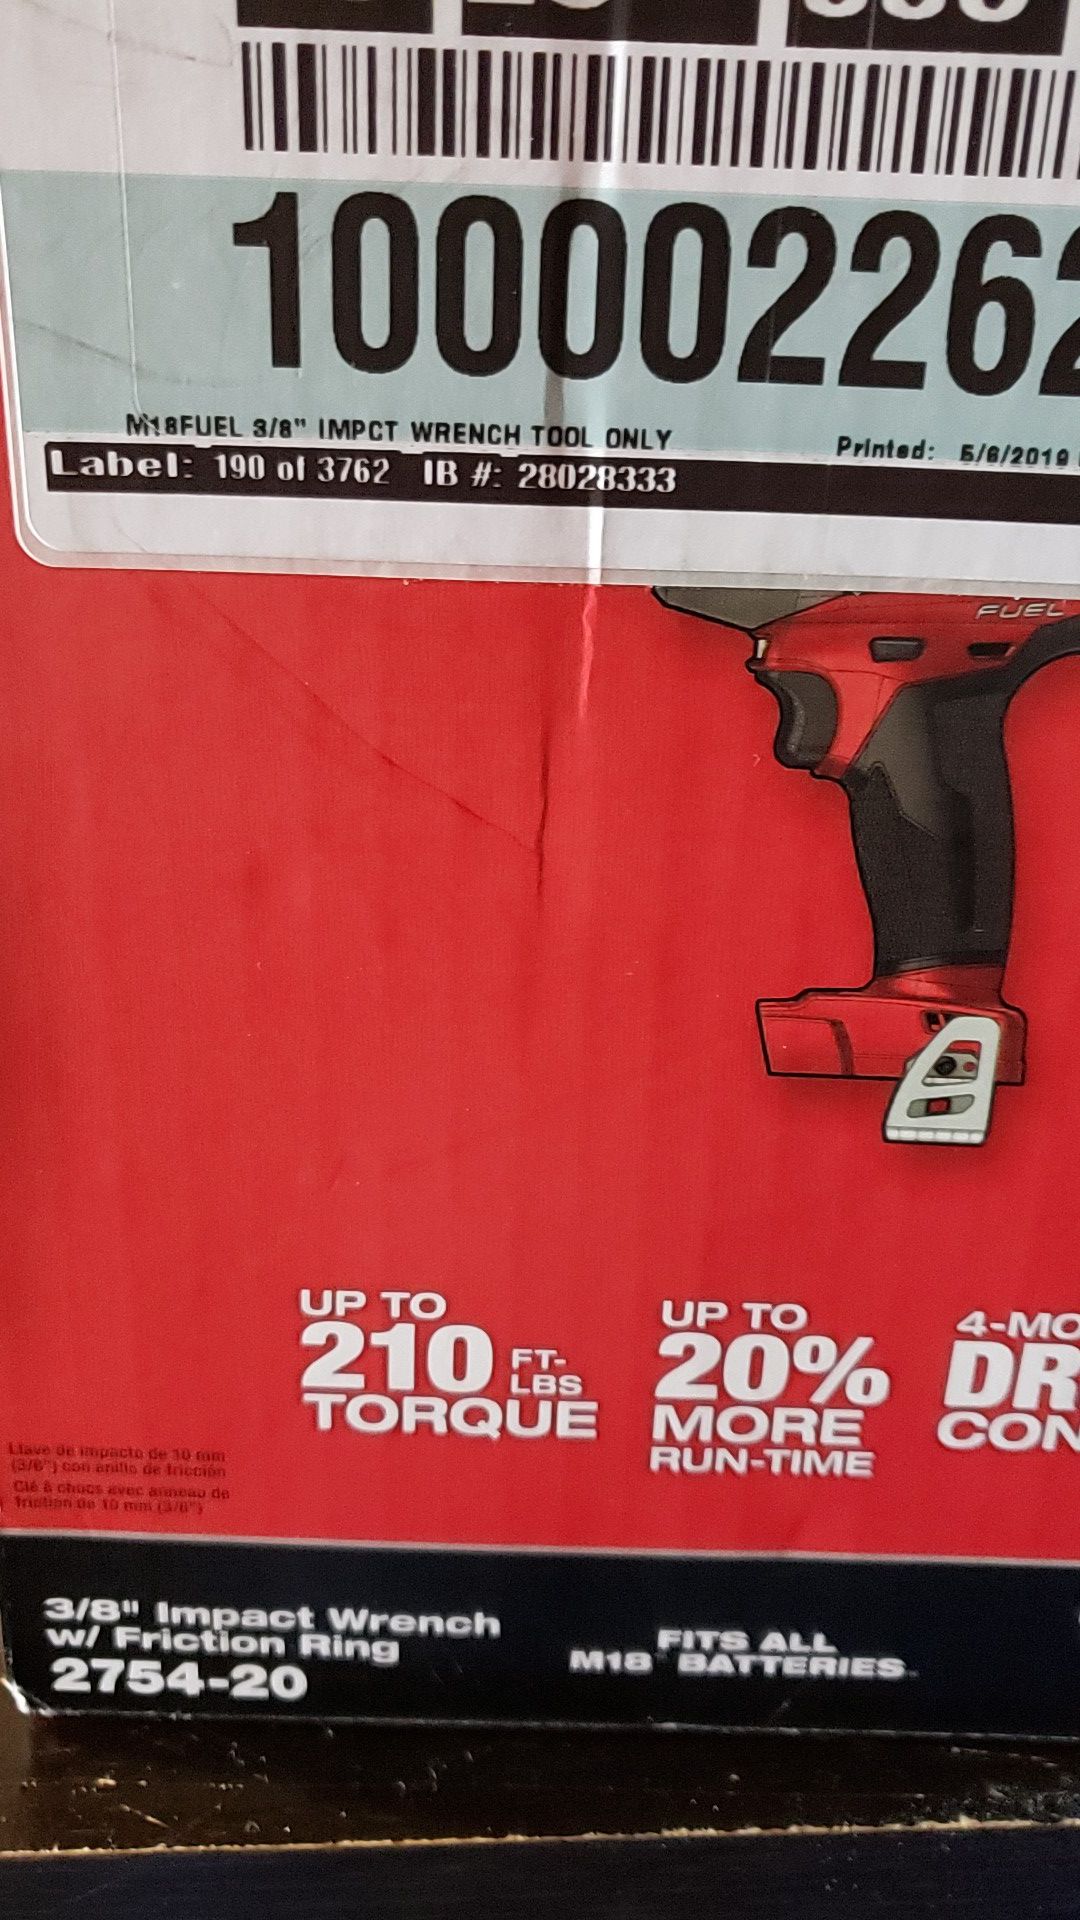 Milwaukee m18 fuel 3/8" impact wrench with friction ring